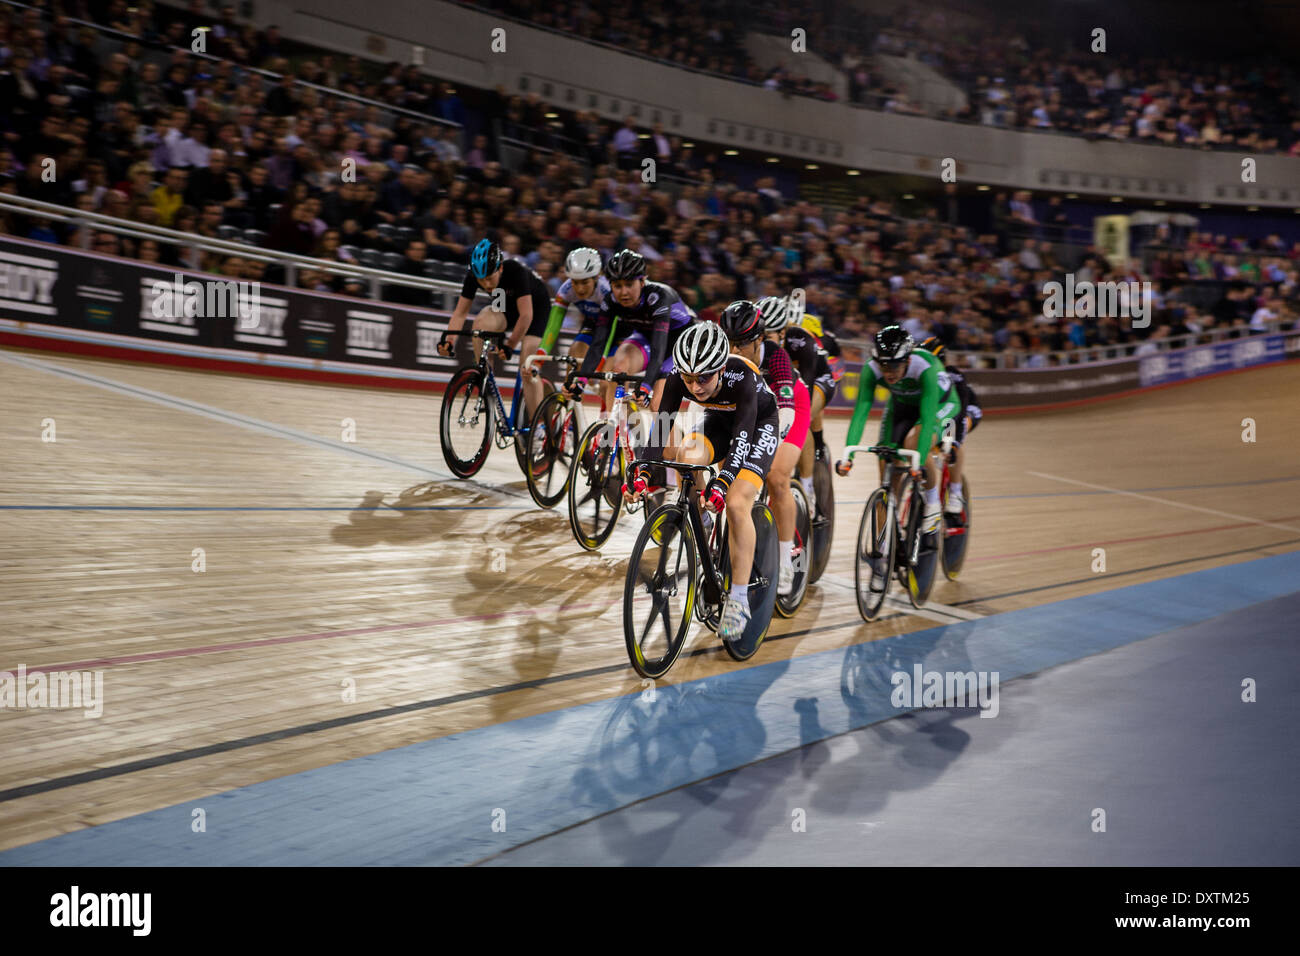 Cyclists race around the track at the London Olympic Velodrome Stock Photo